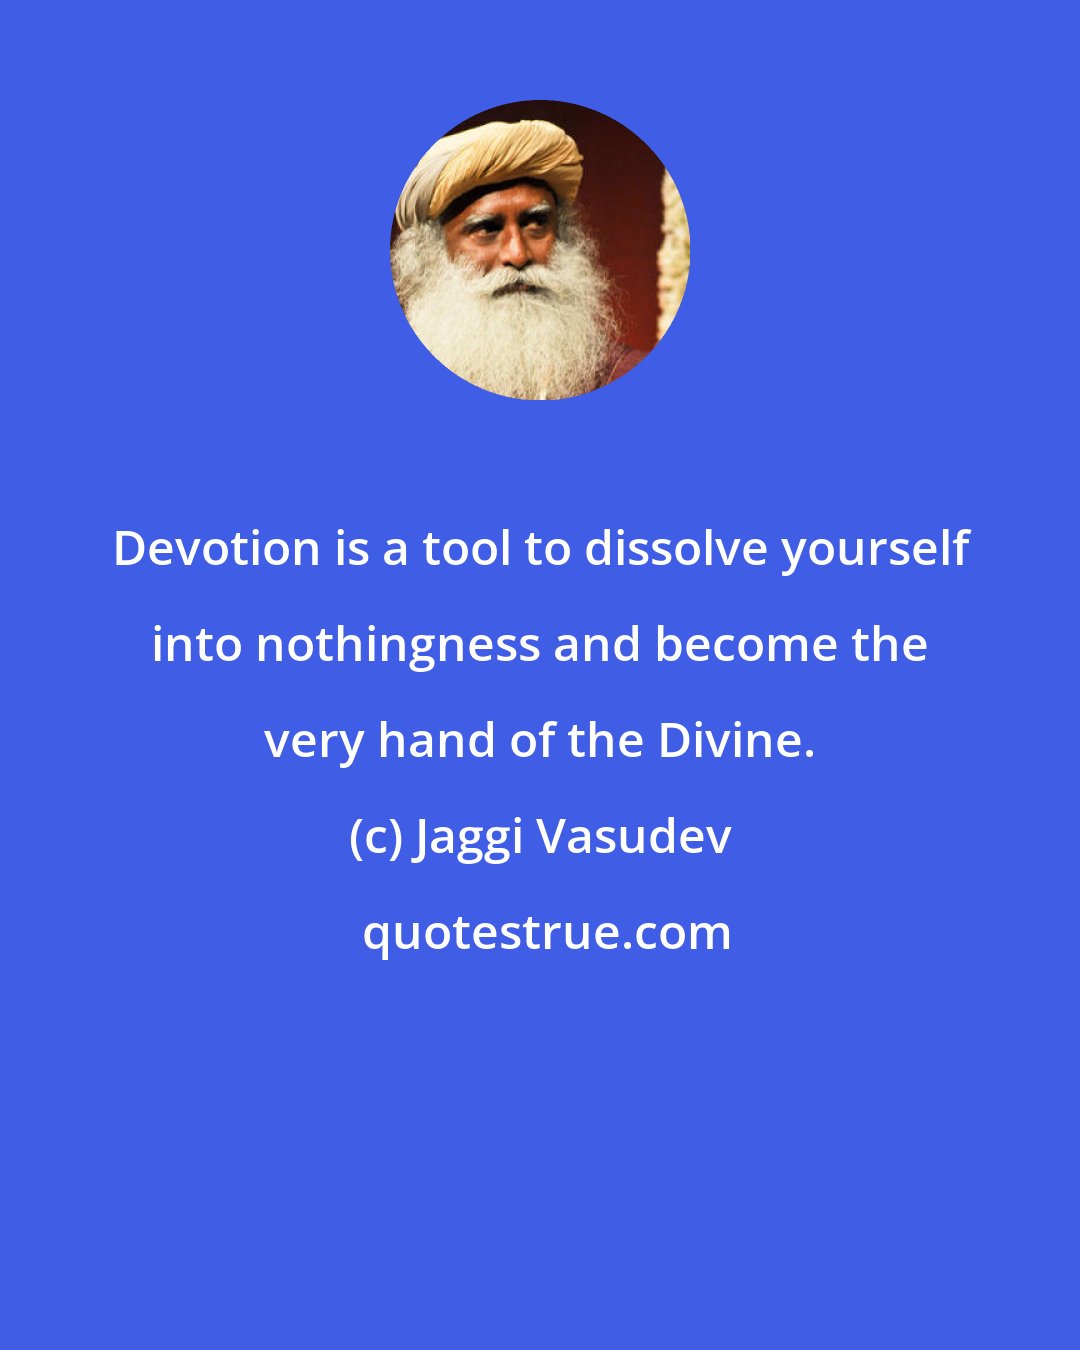 Jaggi Vasudev: Devotion is a tool to dissolve yourself into nothingness and become the very hand of the Divine.